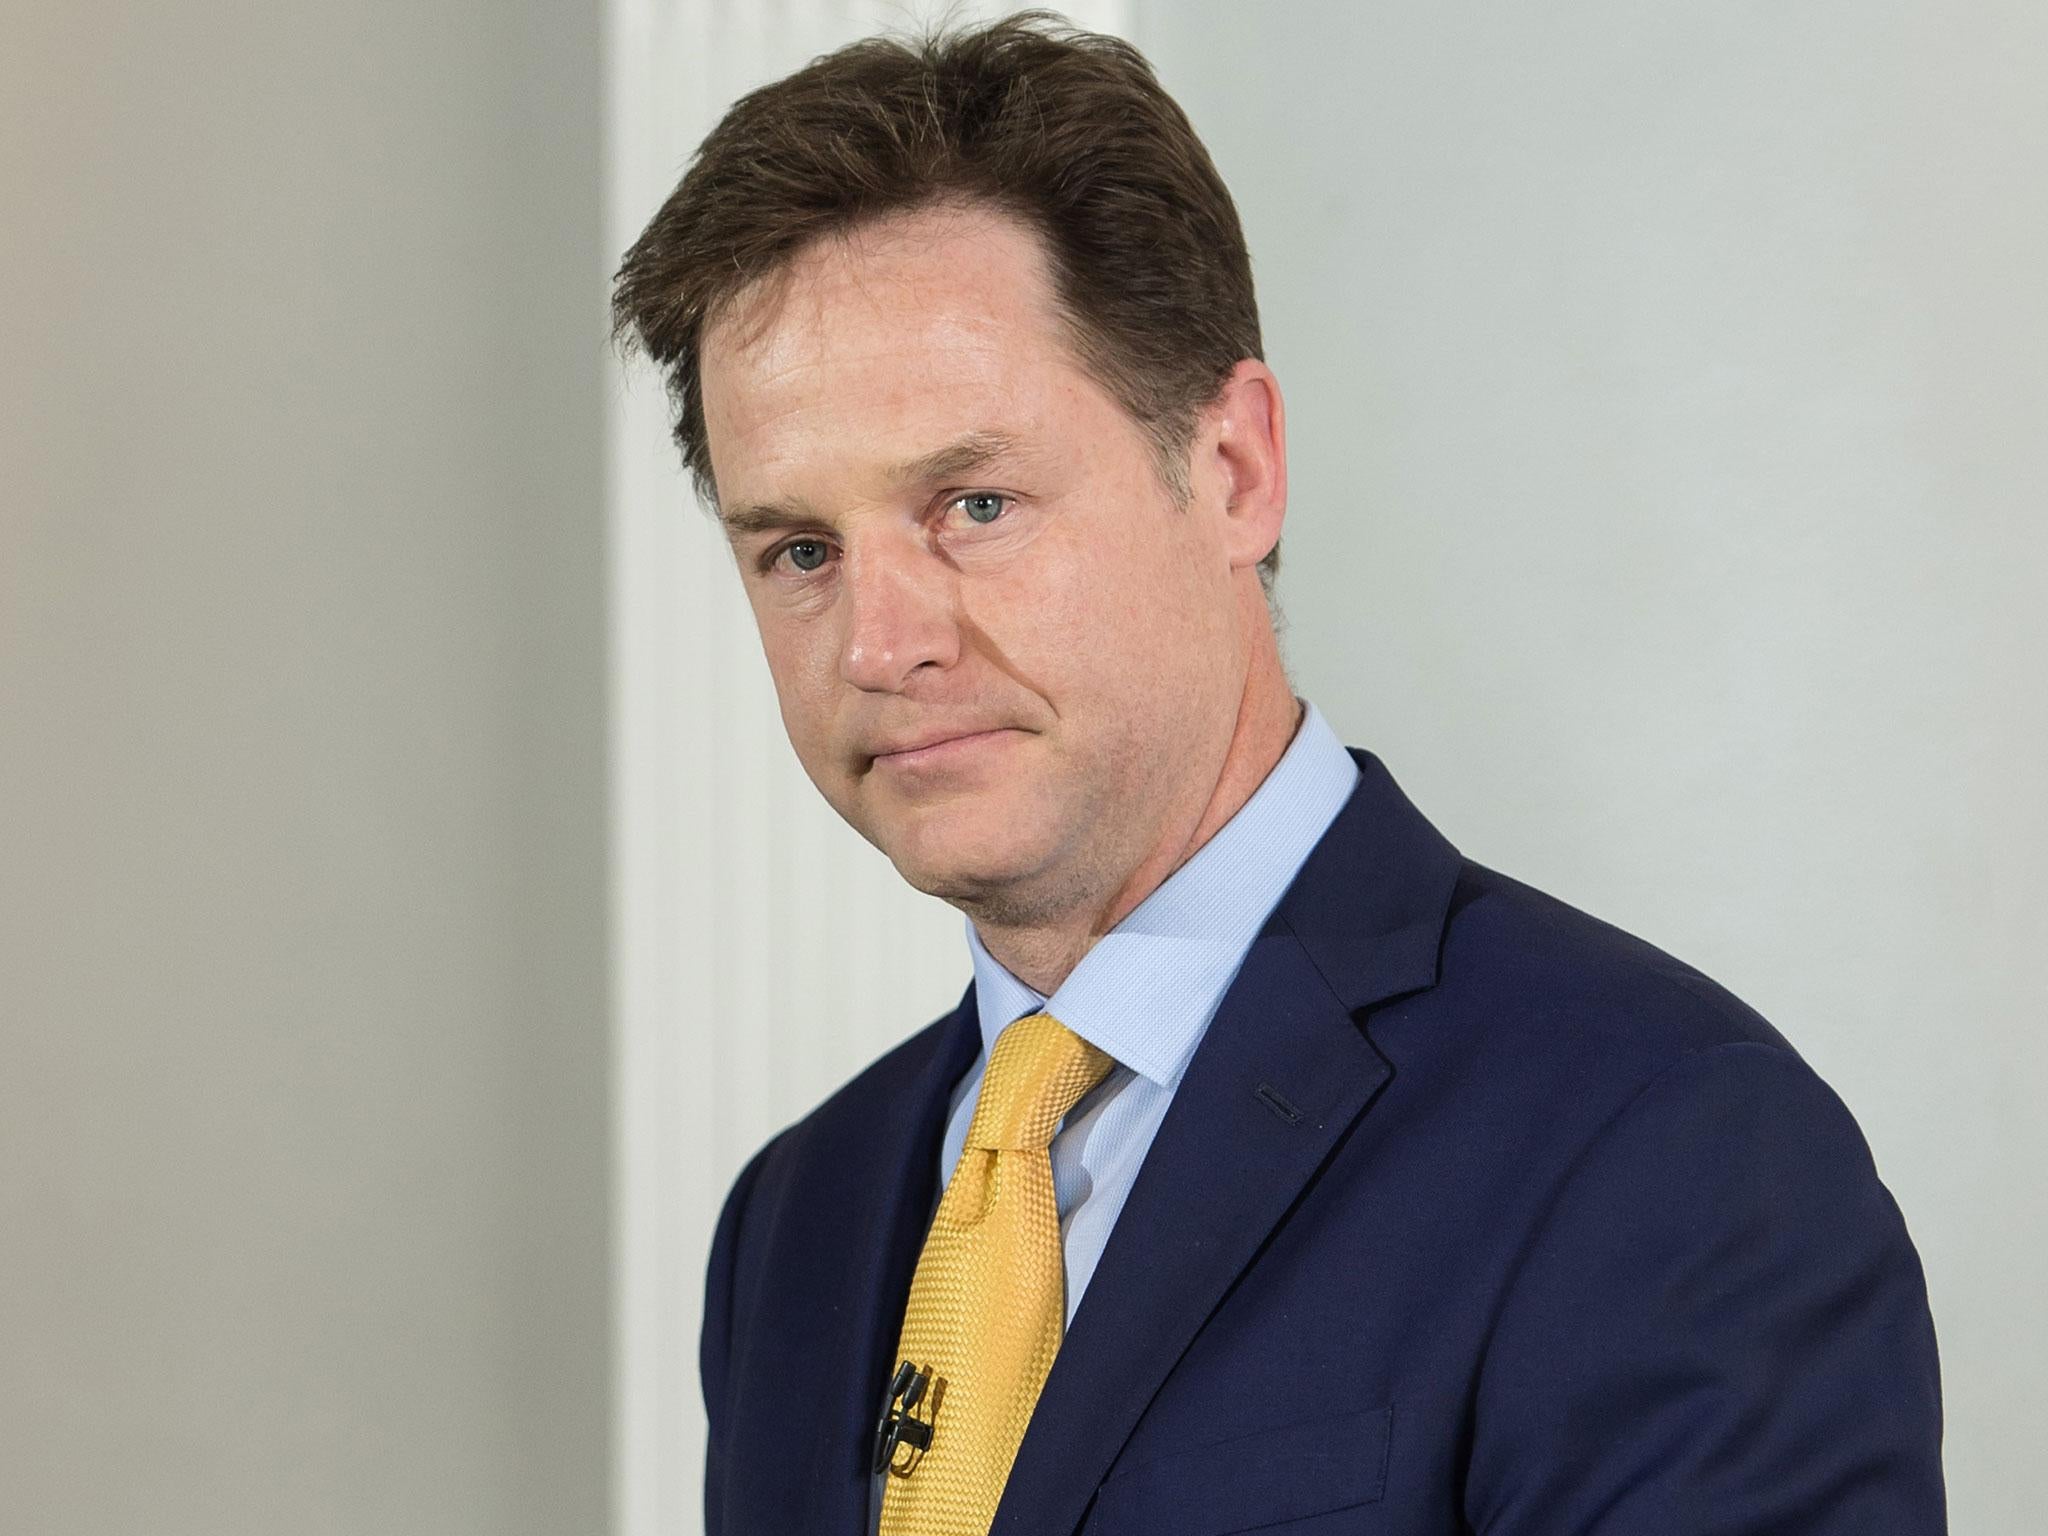 The public duty cost allowance claimed by Sir Nick Clegg provides for the office and secretarial costs for former premiers